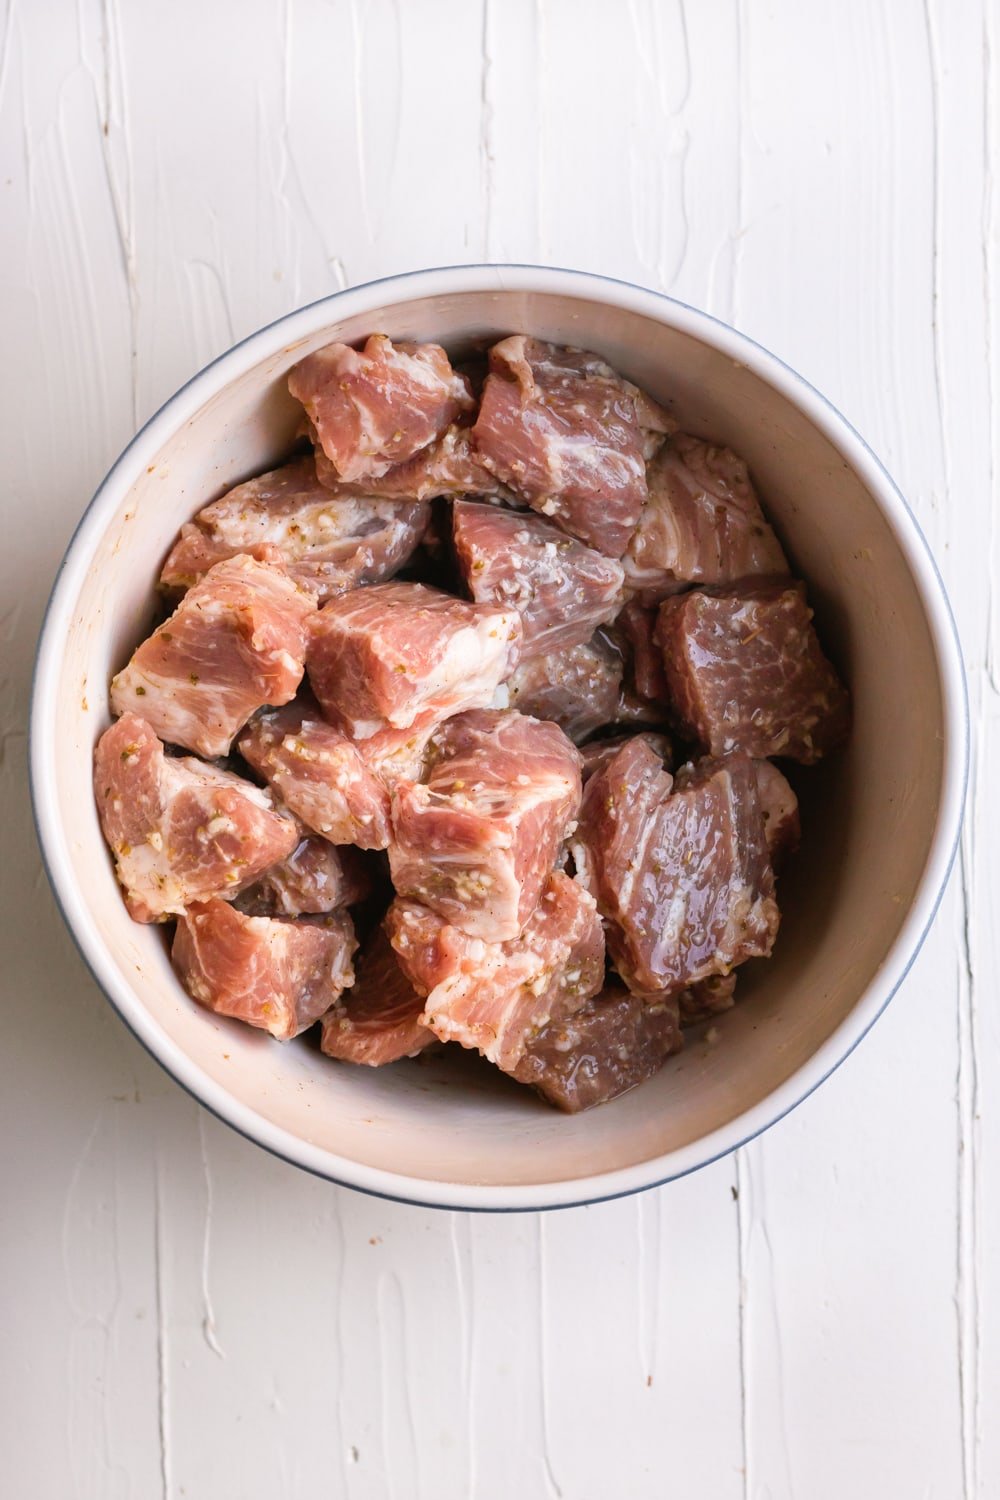 pork chunks in a bowl marinating with sour orange juice, mashed garlic paste, and spices